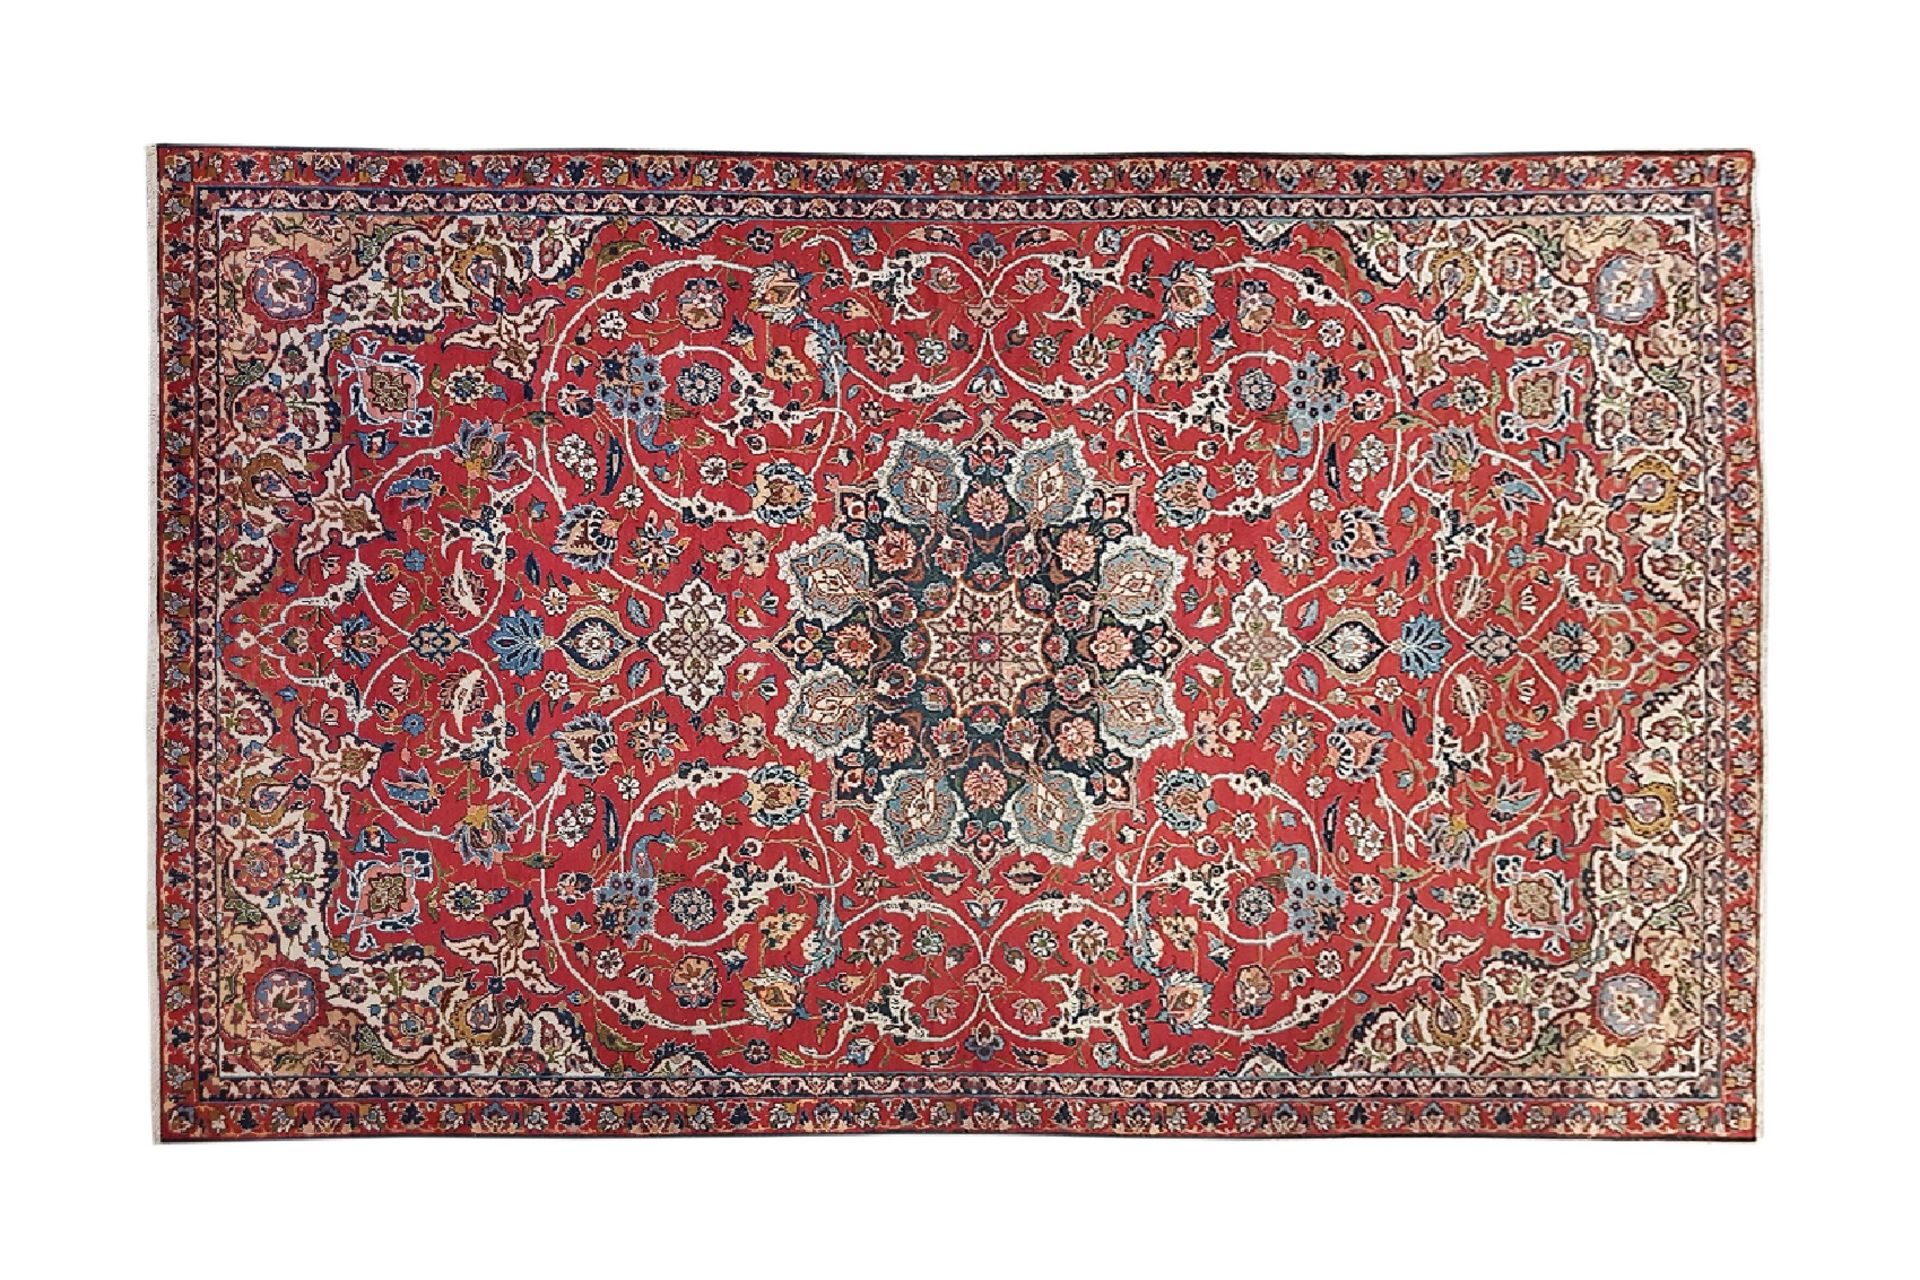 Isfahan Woll-Teppich, 1920-1930 | Isfahan wool carpet, 1920-1930 - Image 2 of 2